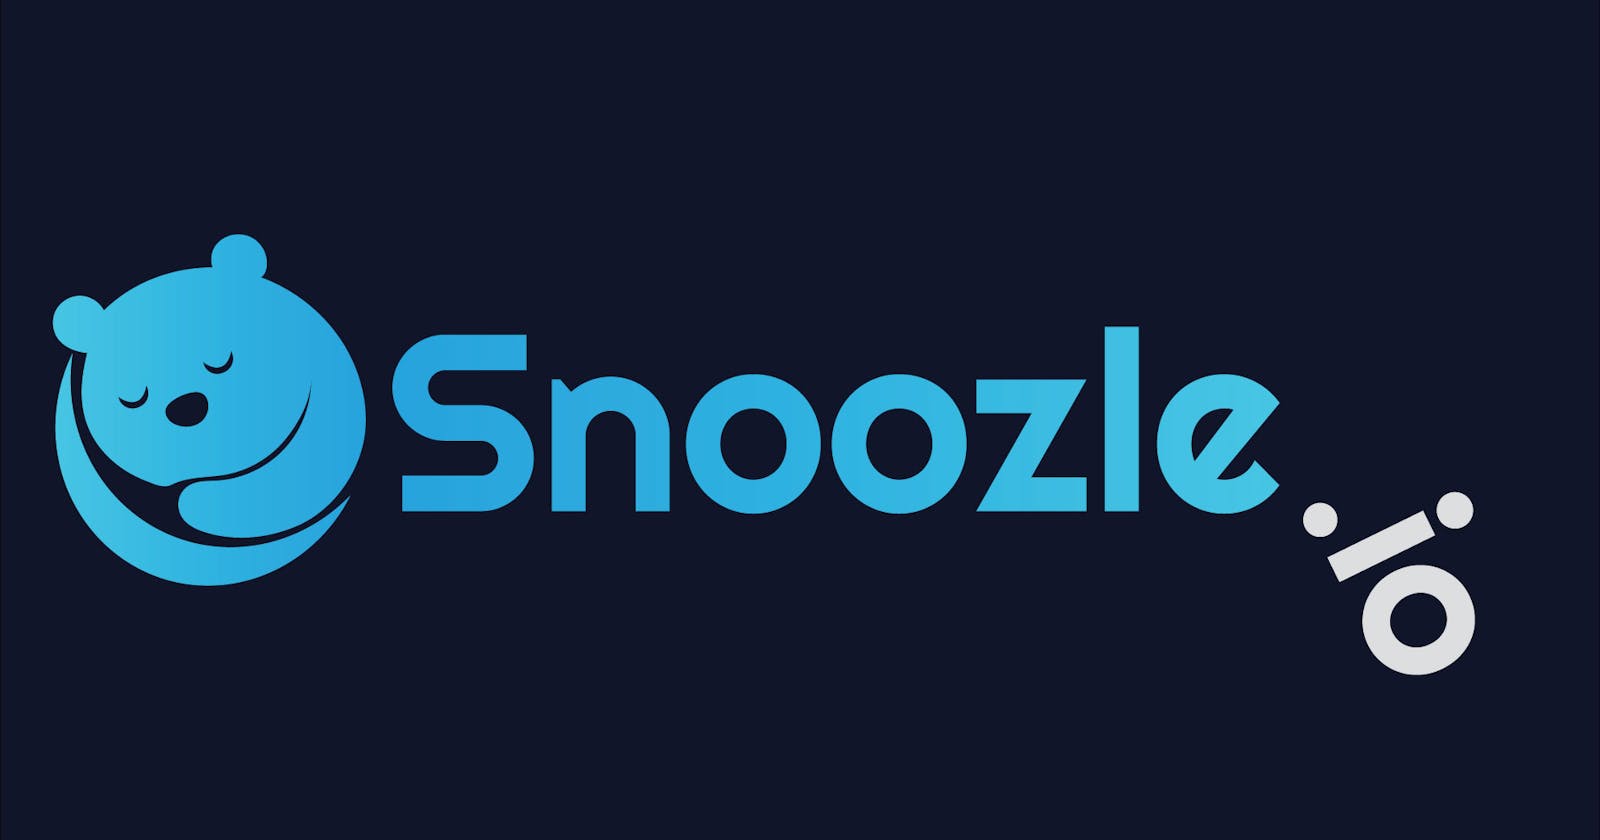 From Concept to Creation: My Story Behind Snoozle